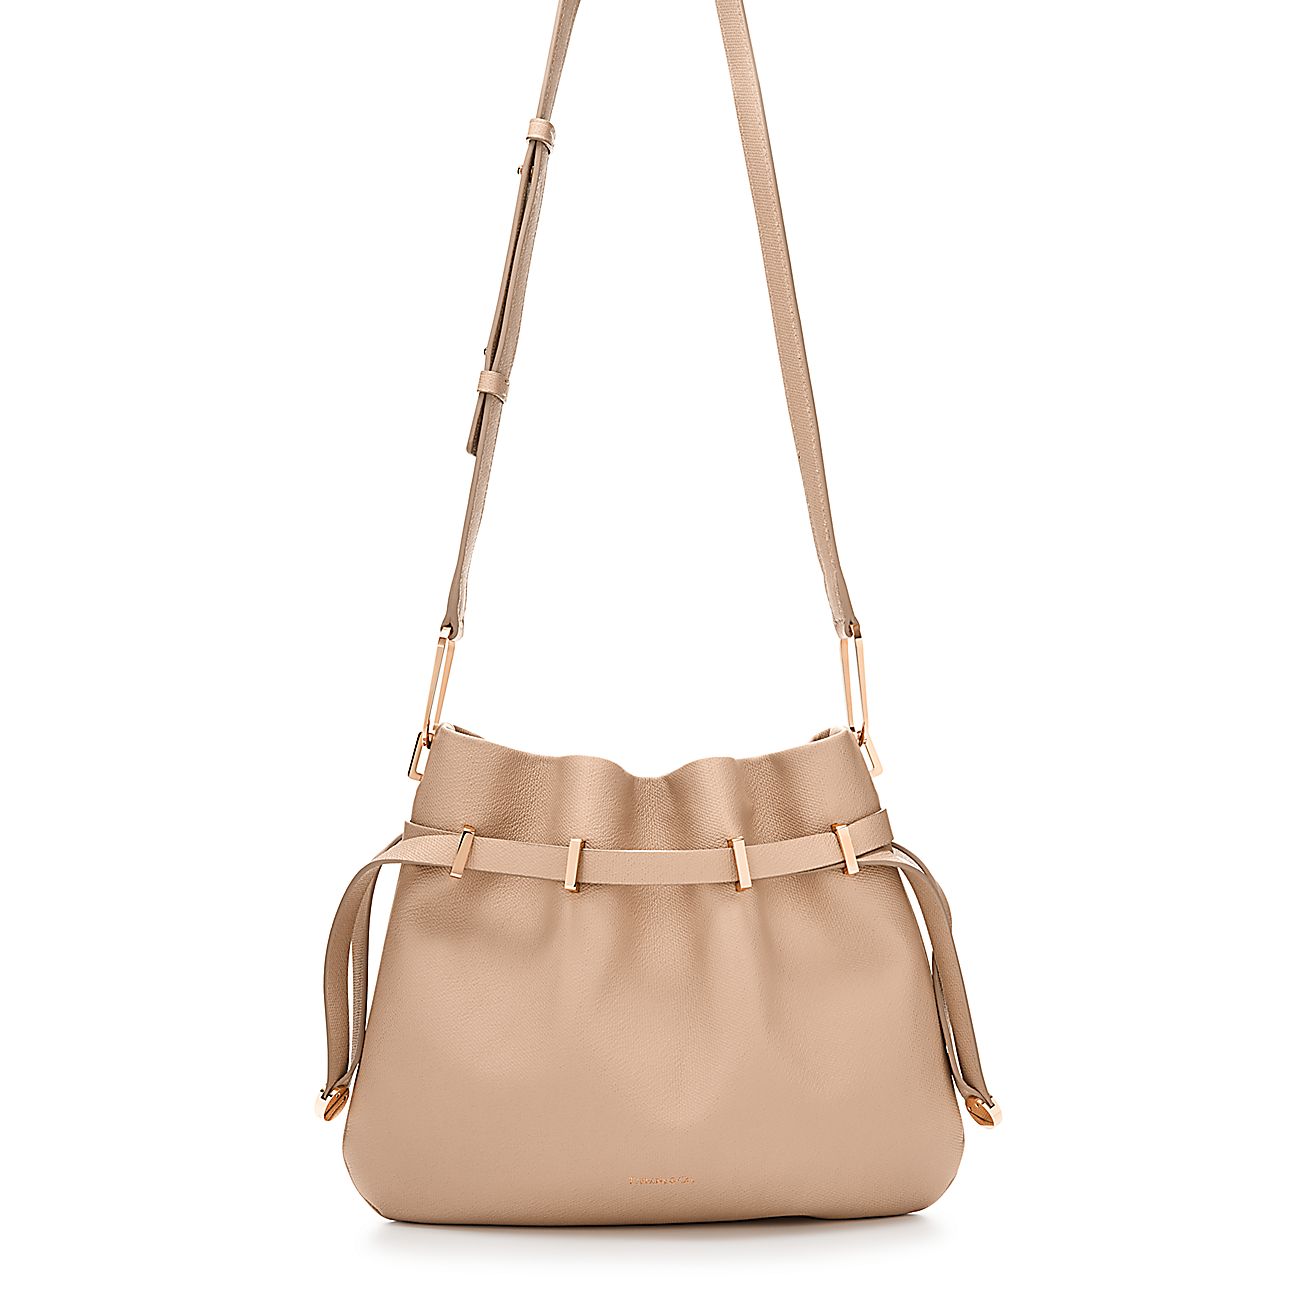 Blair crossbody bag in blush textured leather. More colors available ...